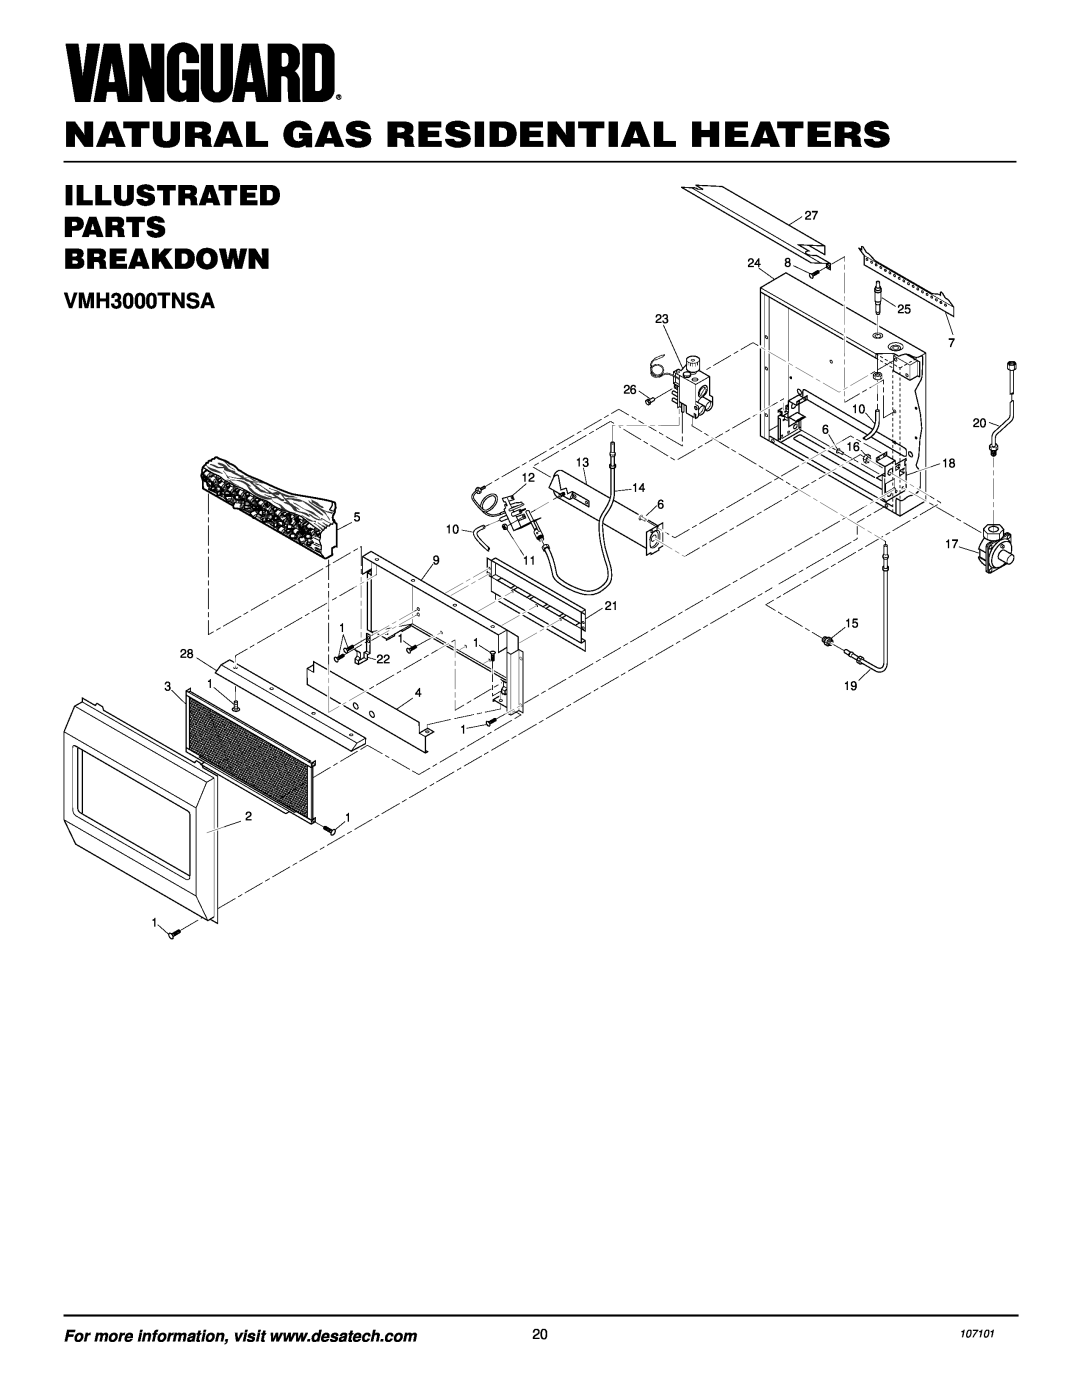 Vanguard Heating VMH3000TNSA installation manual Illustrated Parts Breakdown, Natural Gas Residential Heaters, 107101 